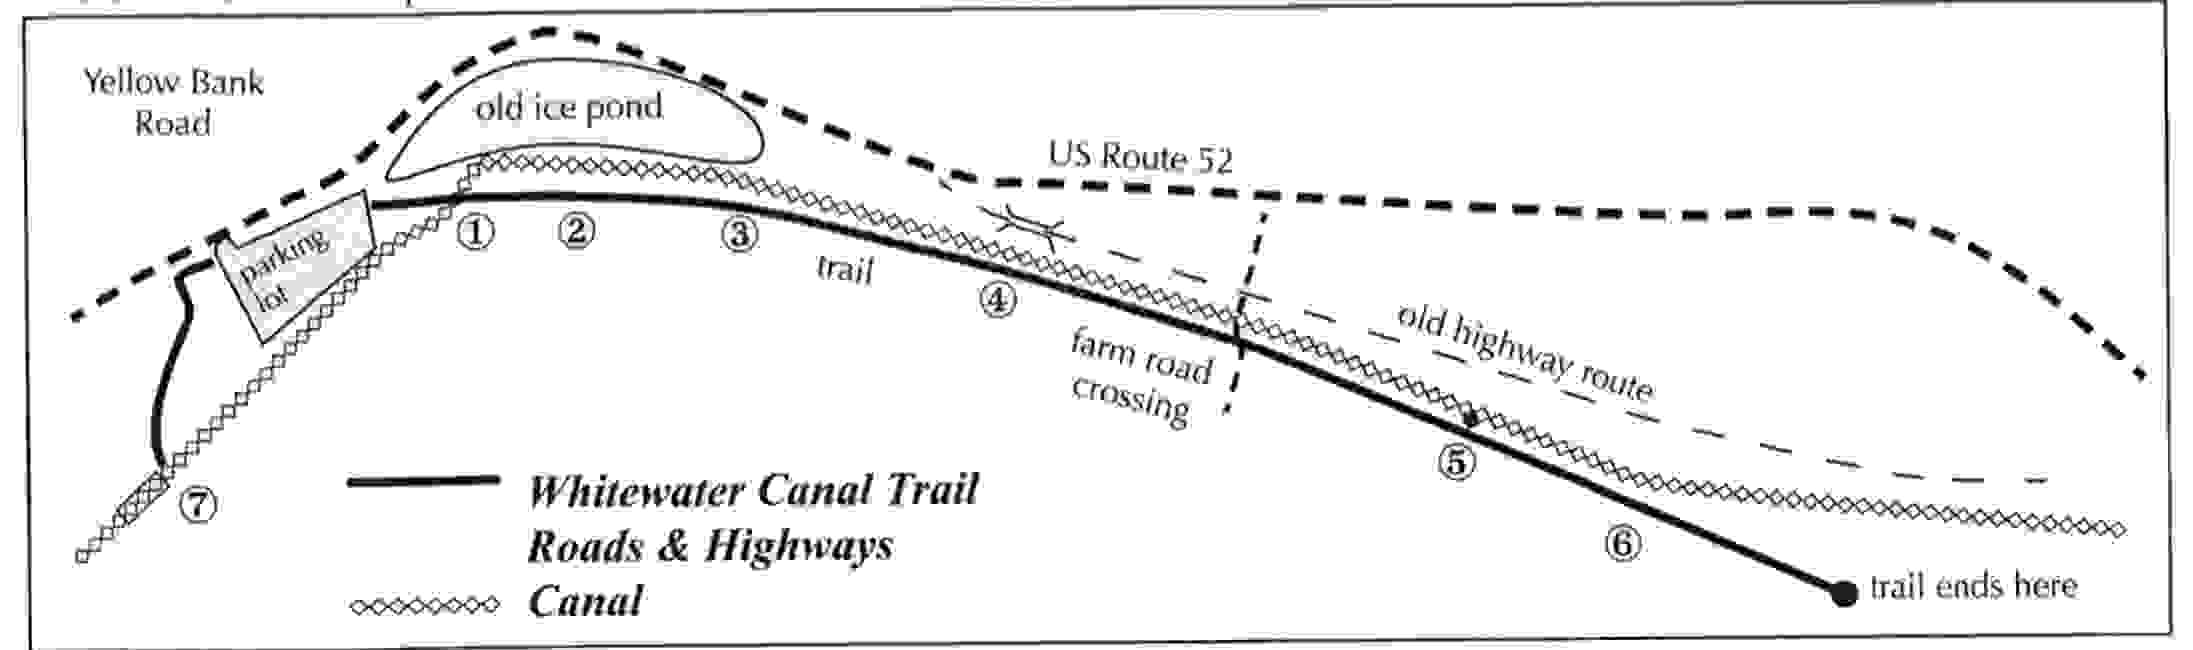 maps-white-water-canal-trail-inc